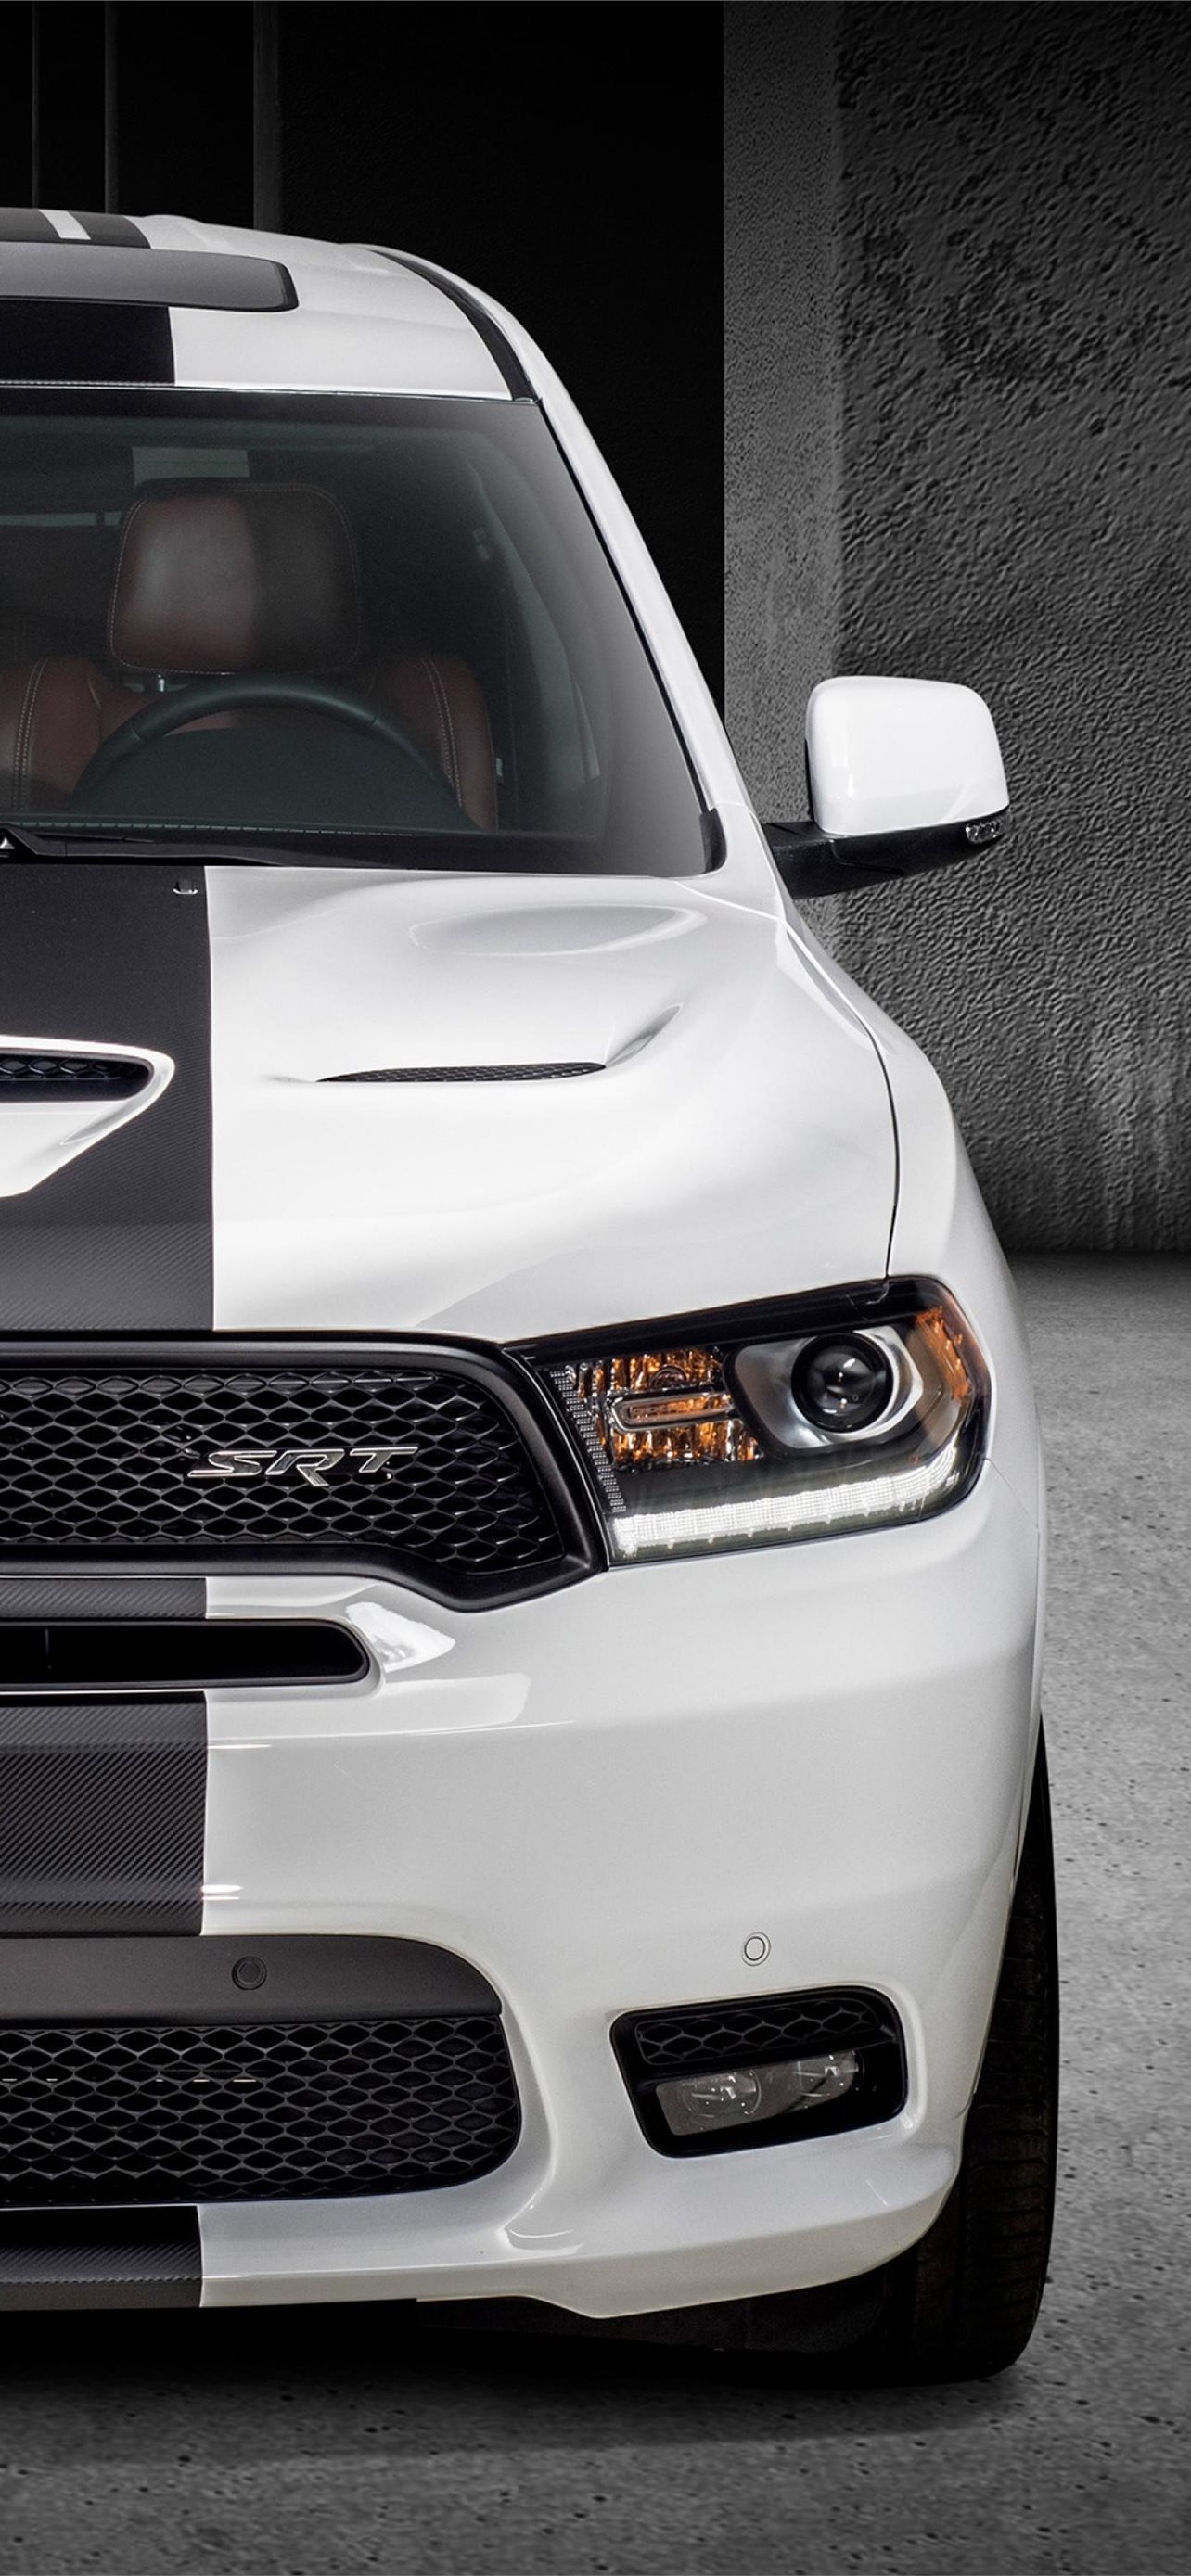 Dodge Durango SRT, Best iPhone wallpapers, High-quality images, Enhance your device, 1290x2780 HD Handy